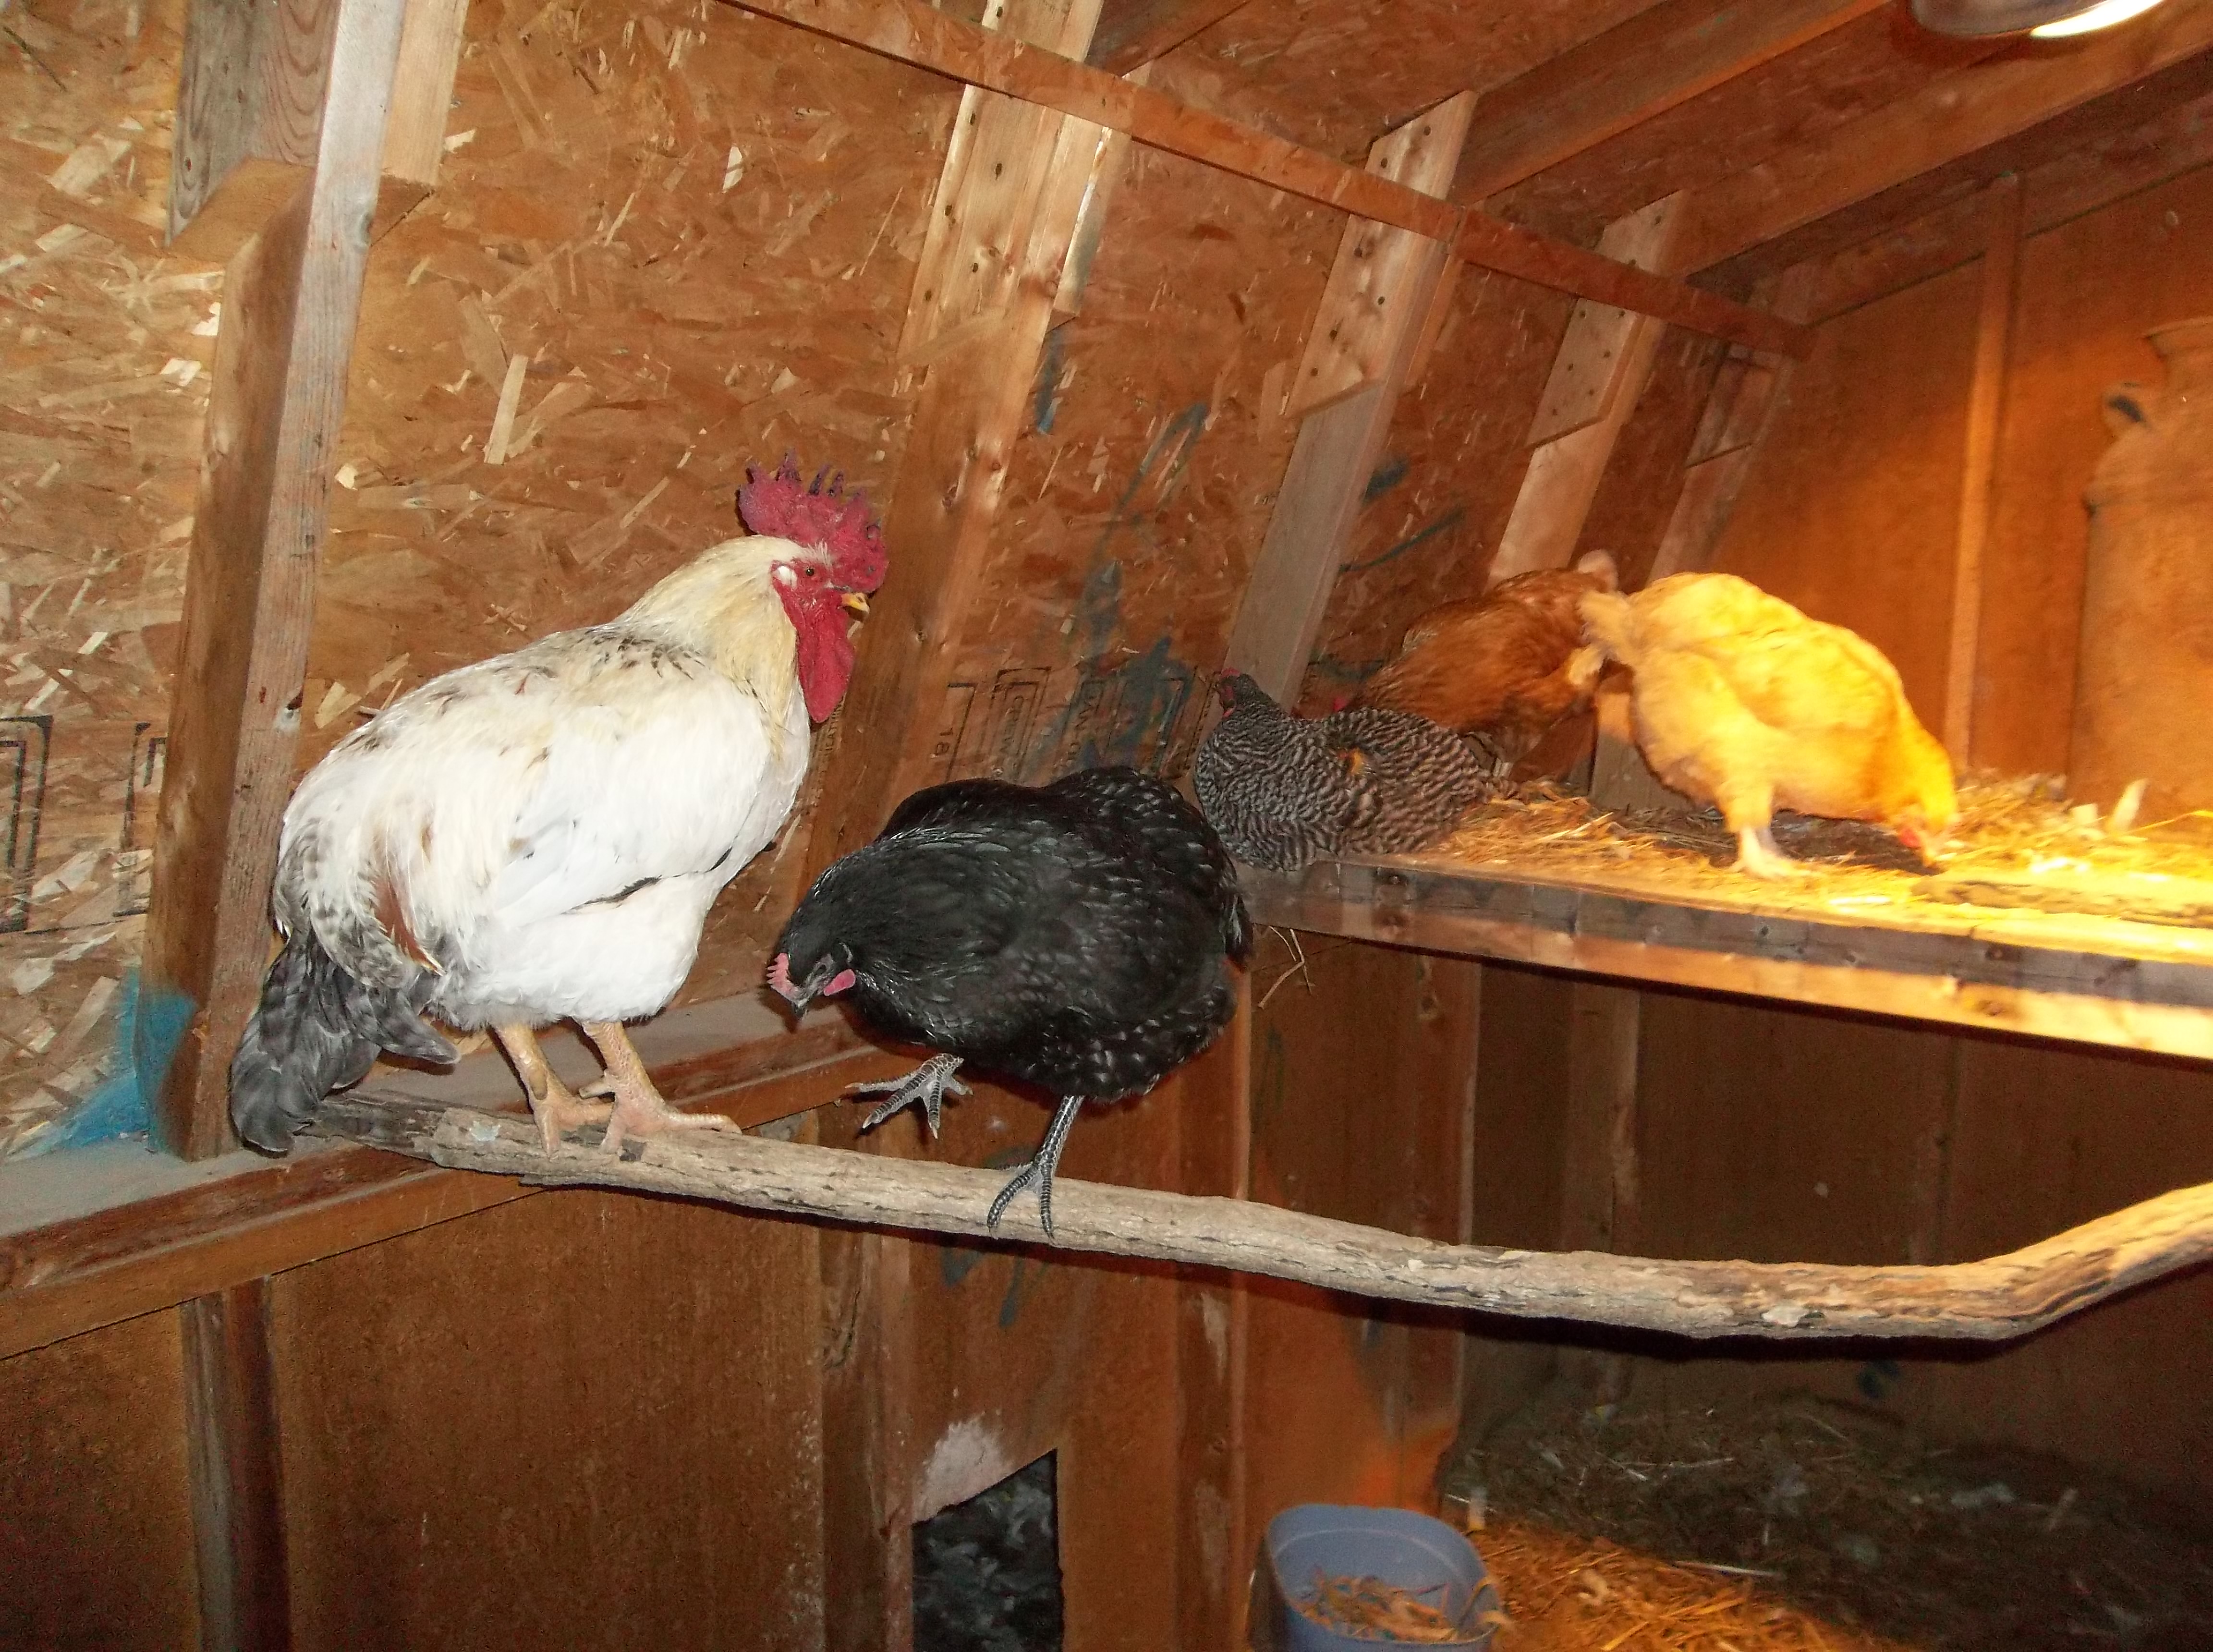 Looks like it is going to be a long night for Elvis trying to get the hens to bed tonight lol.